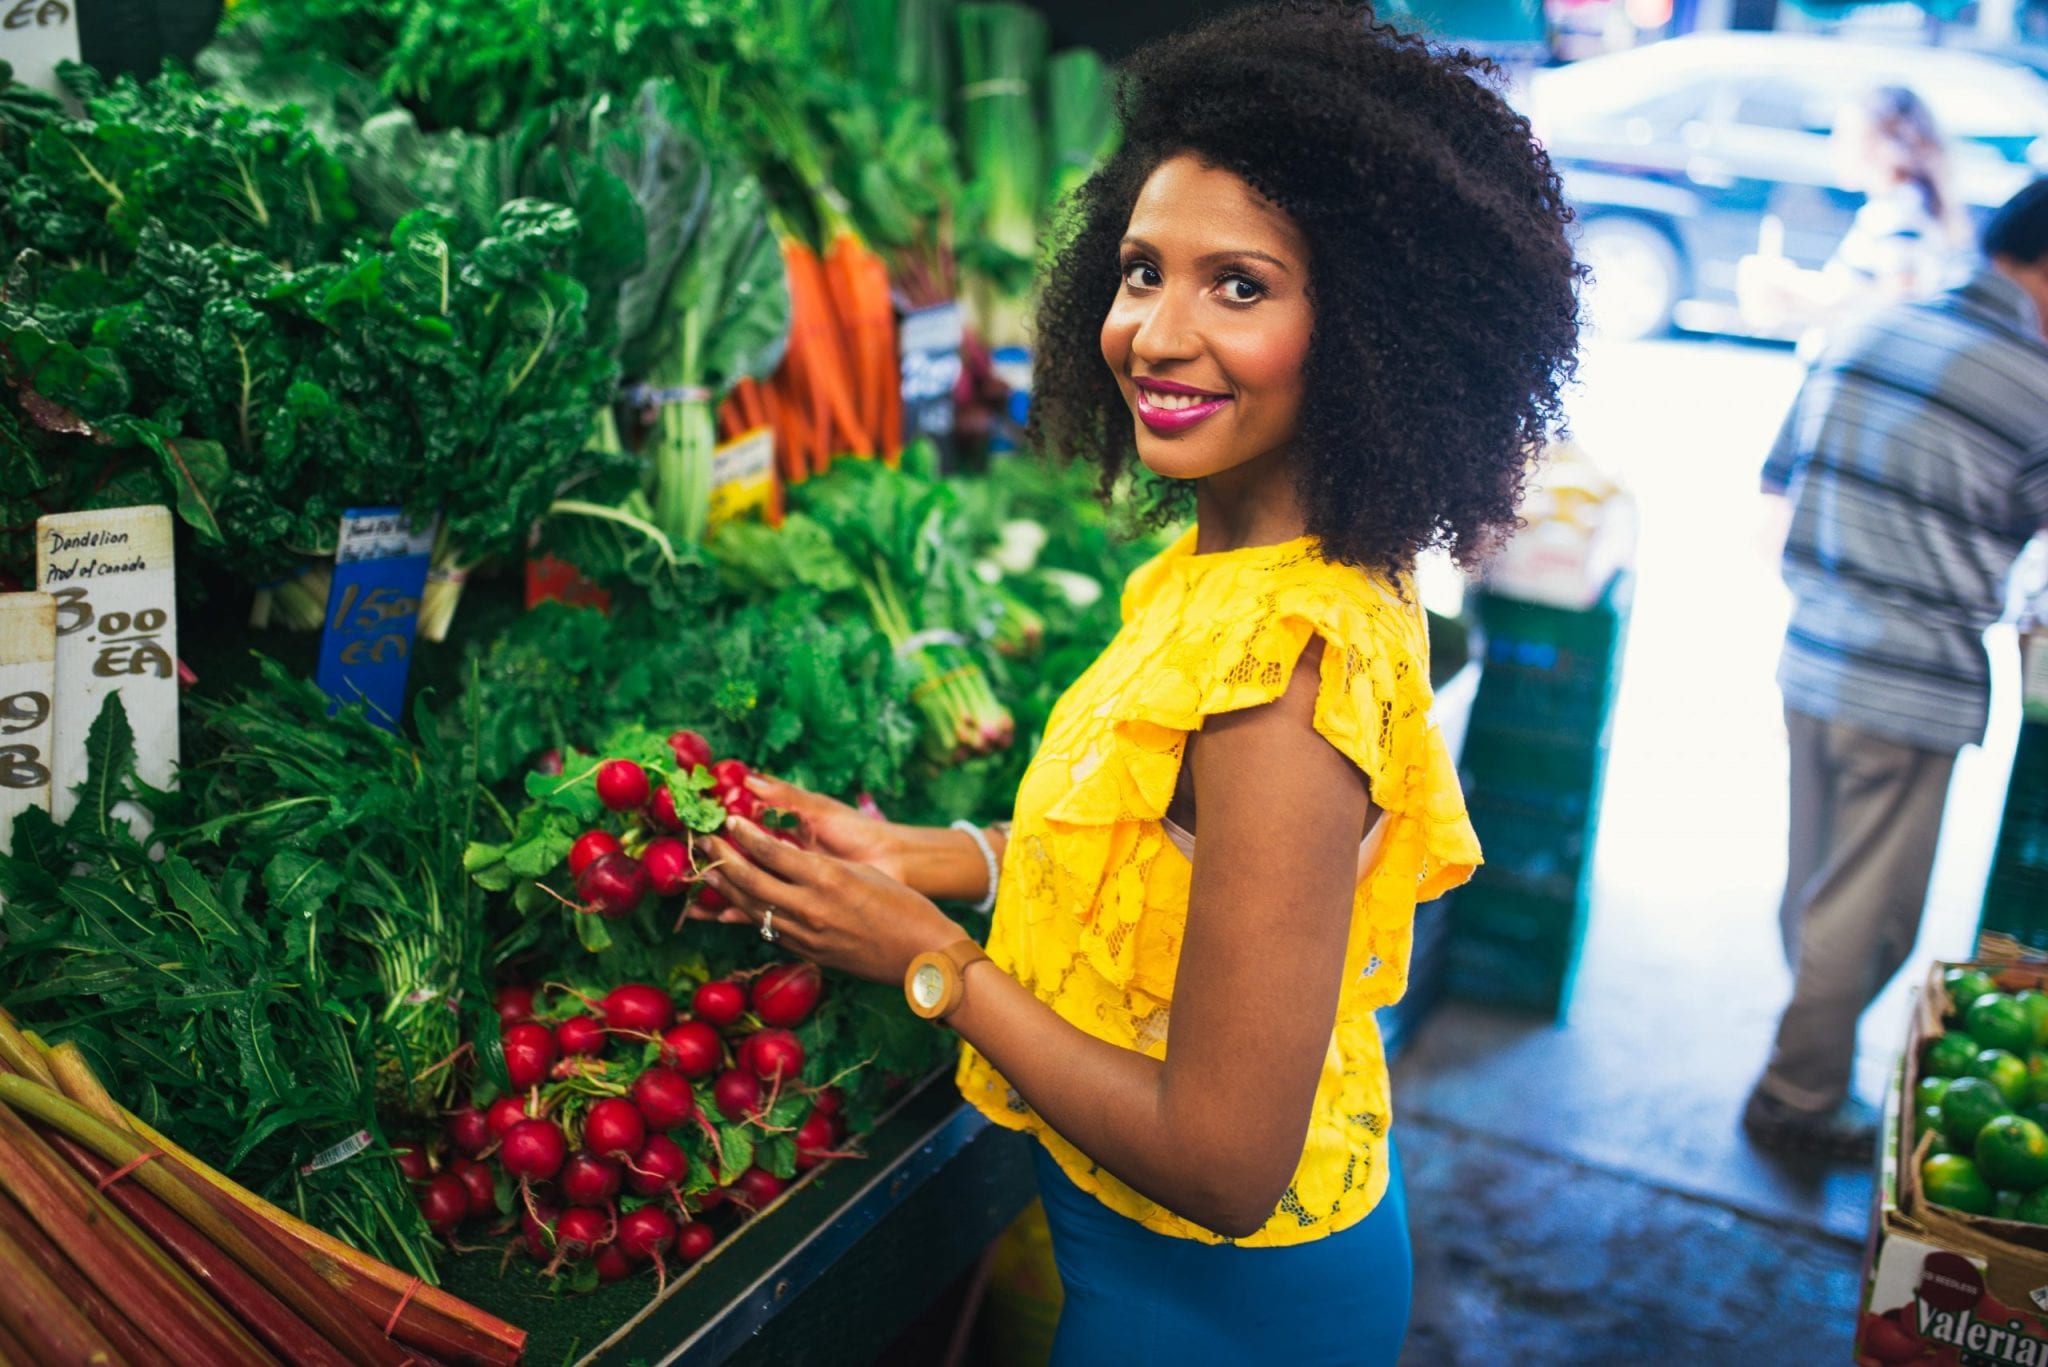 Woman with yellow shirt next to an aisle of fresh produce vegetables